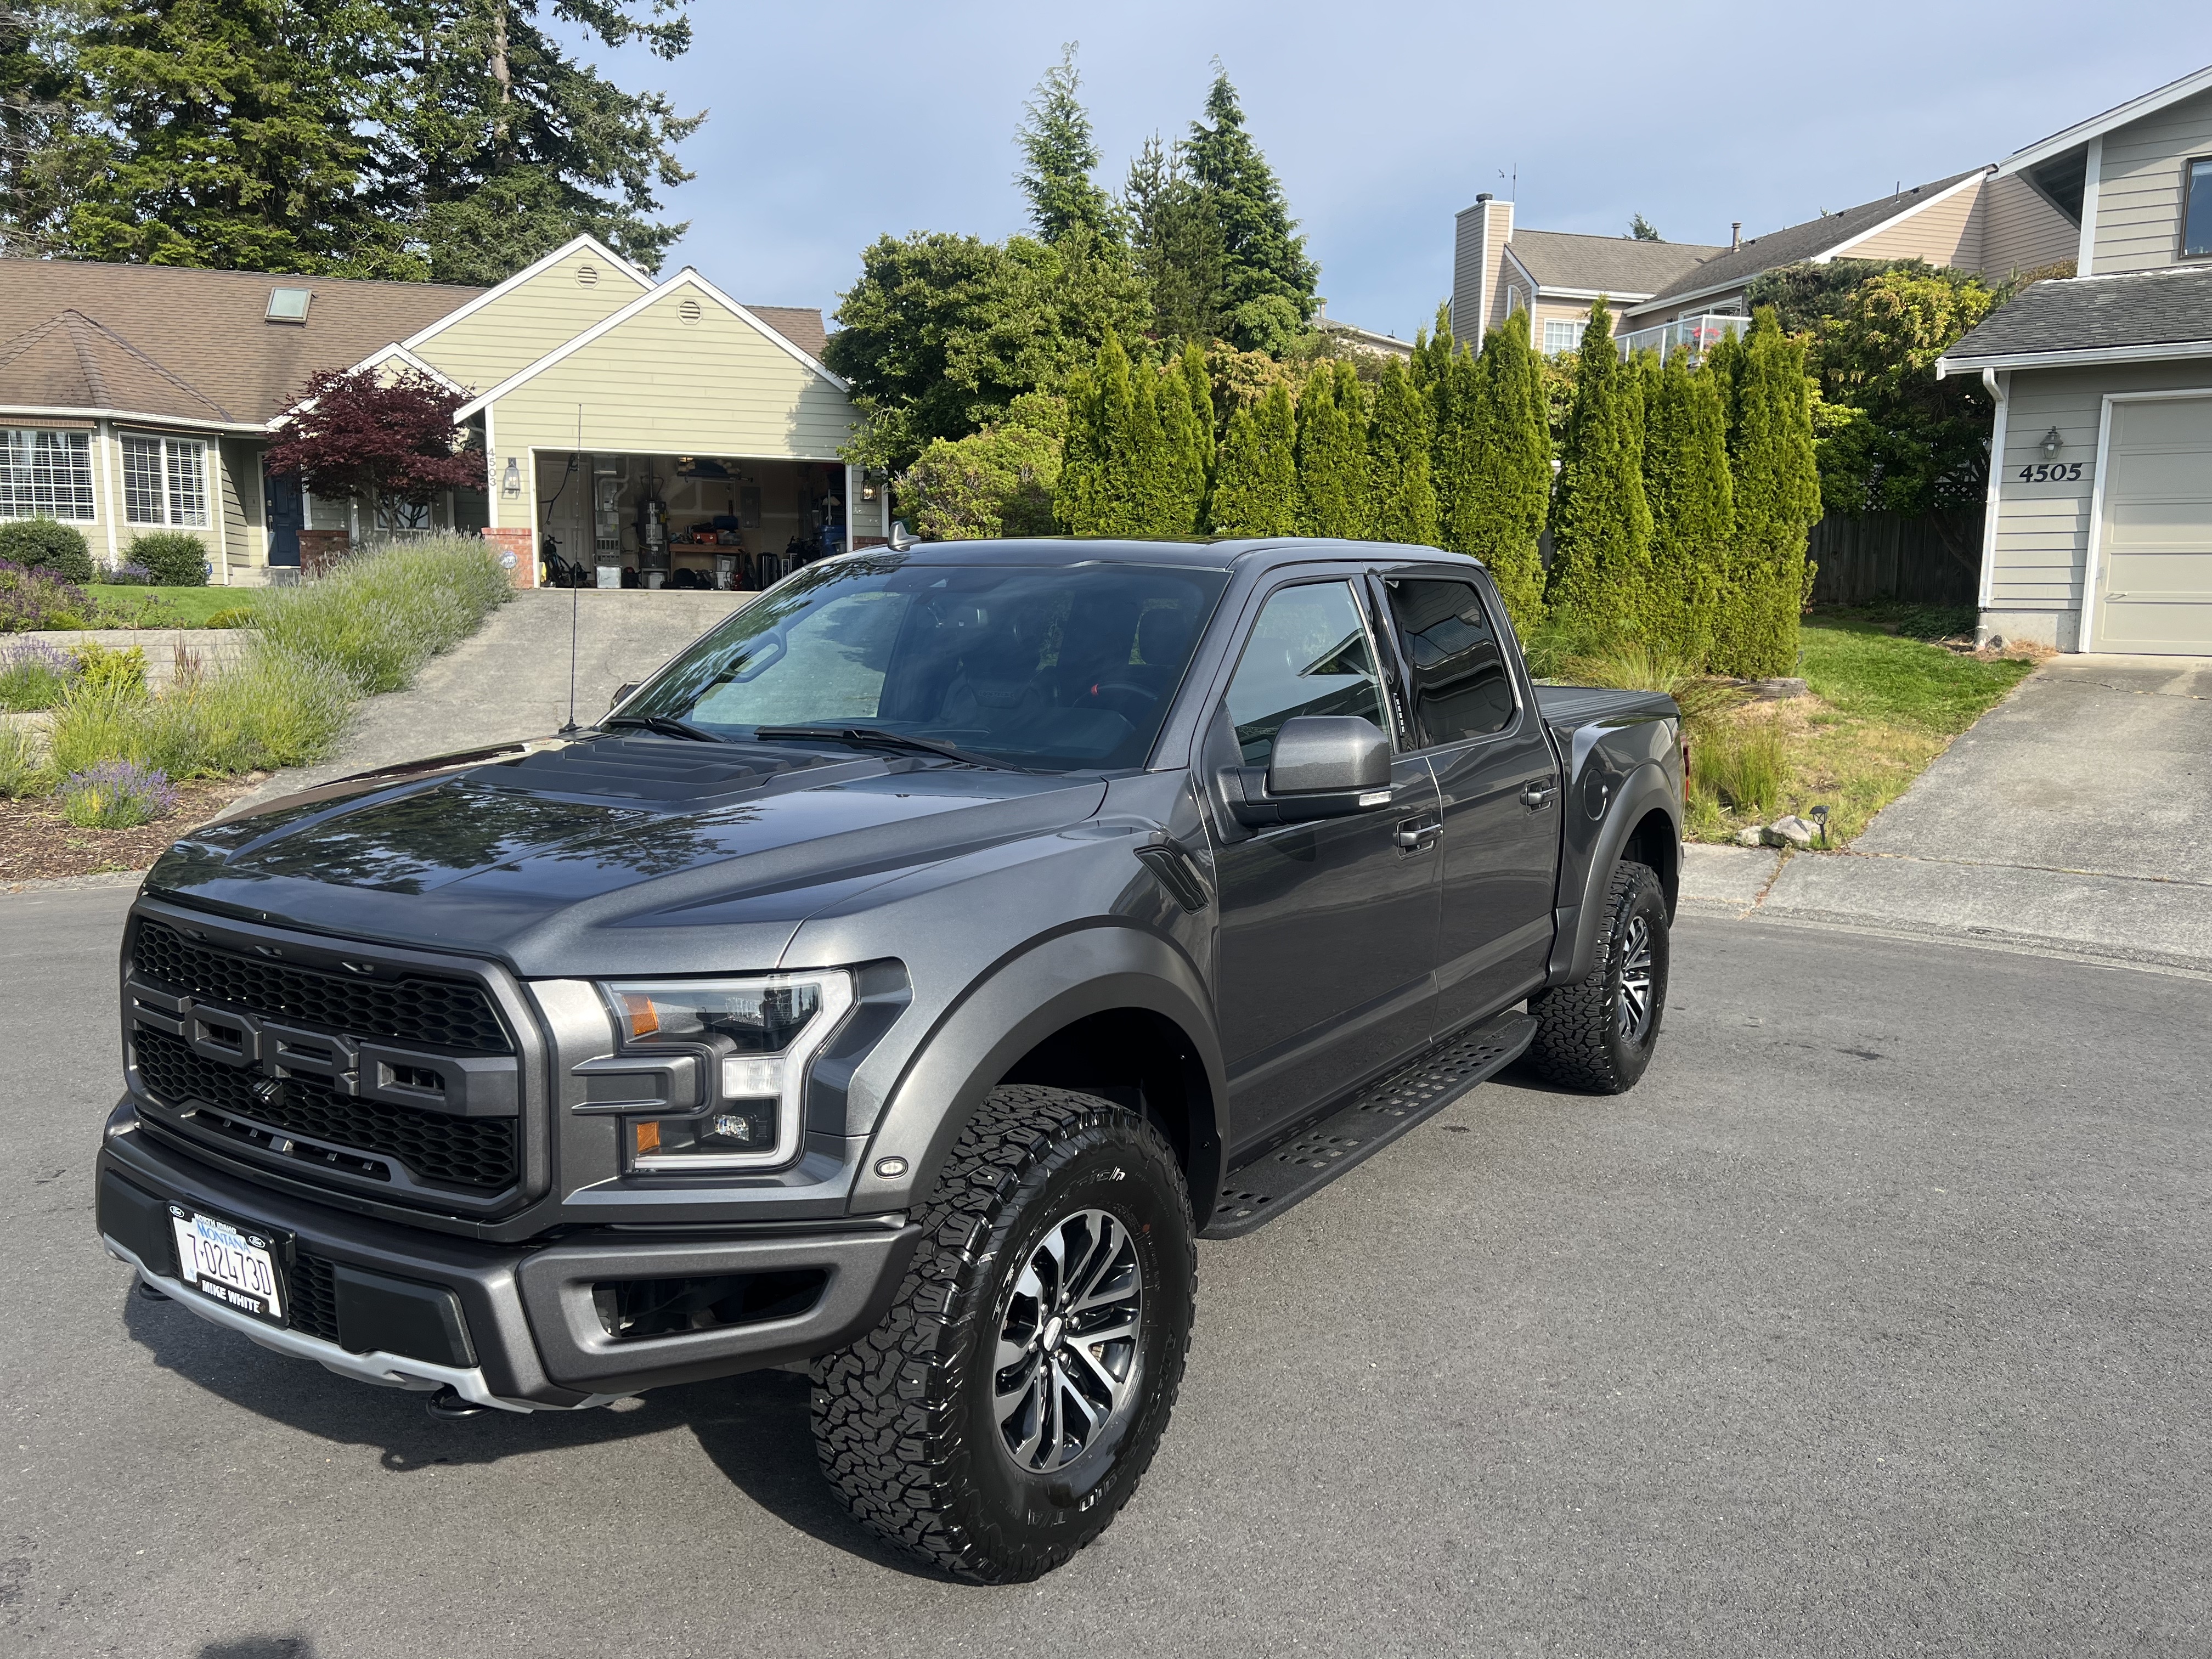 Certified Pre-Owned 2020 Ford F-150 Raptor Crew Cab Pickup in Guelph  #LFB92206